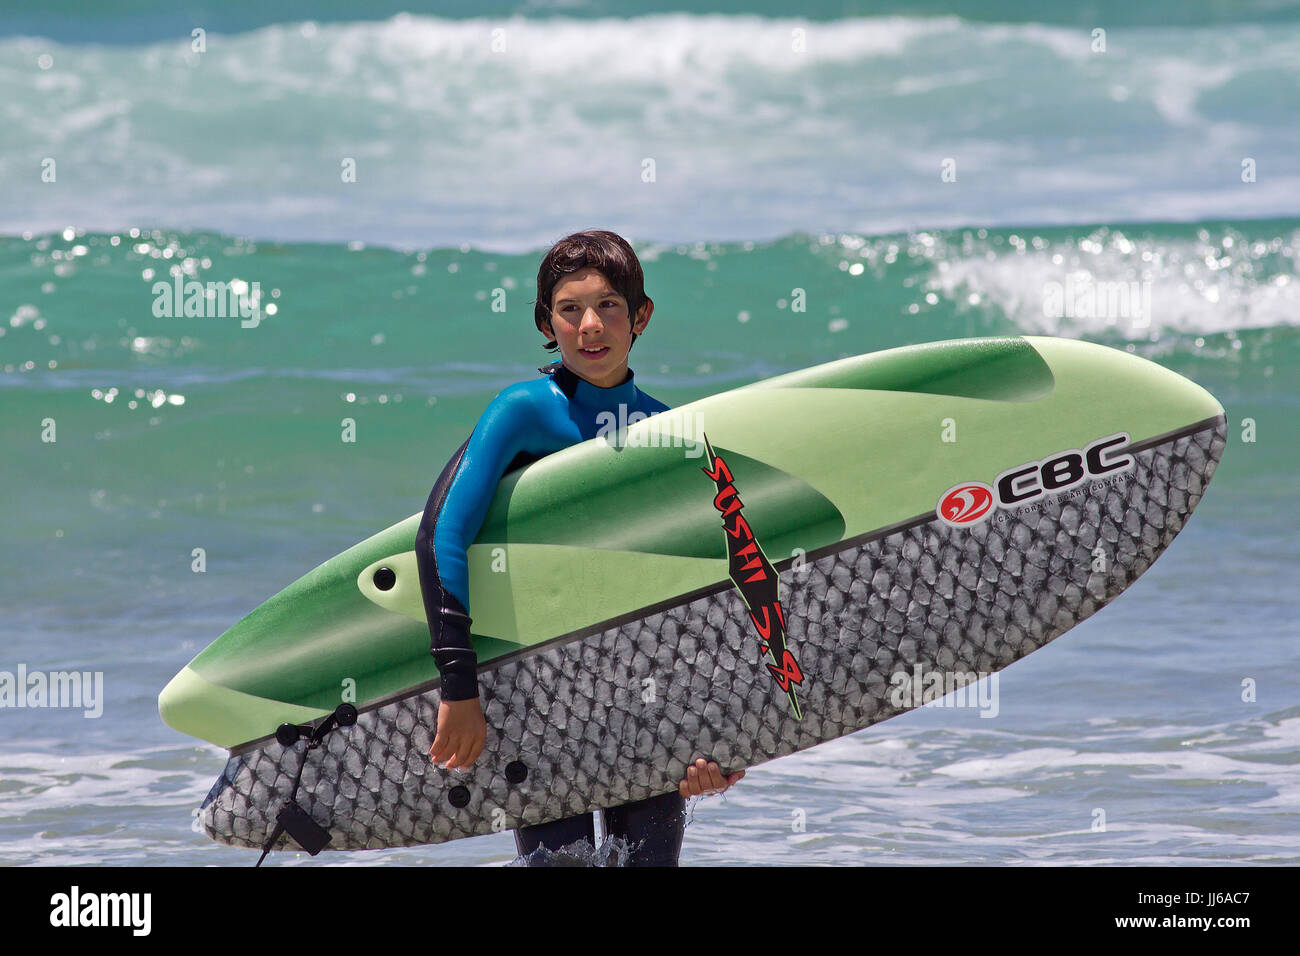 Young surfer boy and surfboard Stock Photo